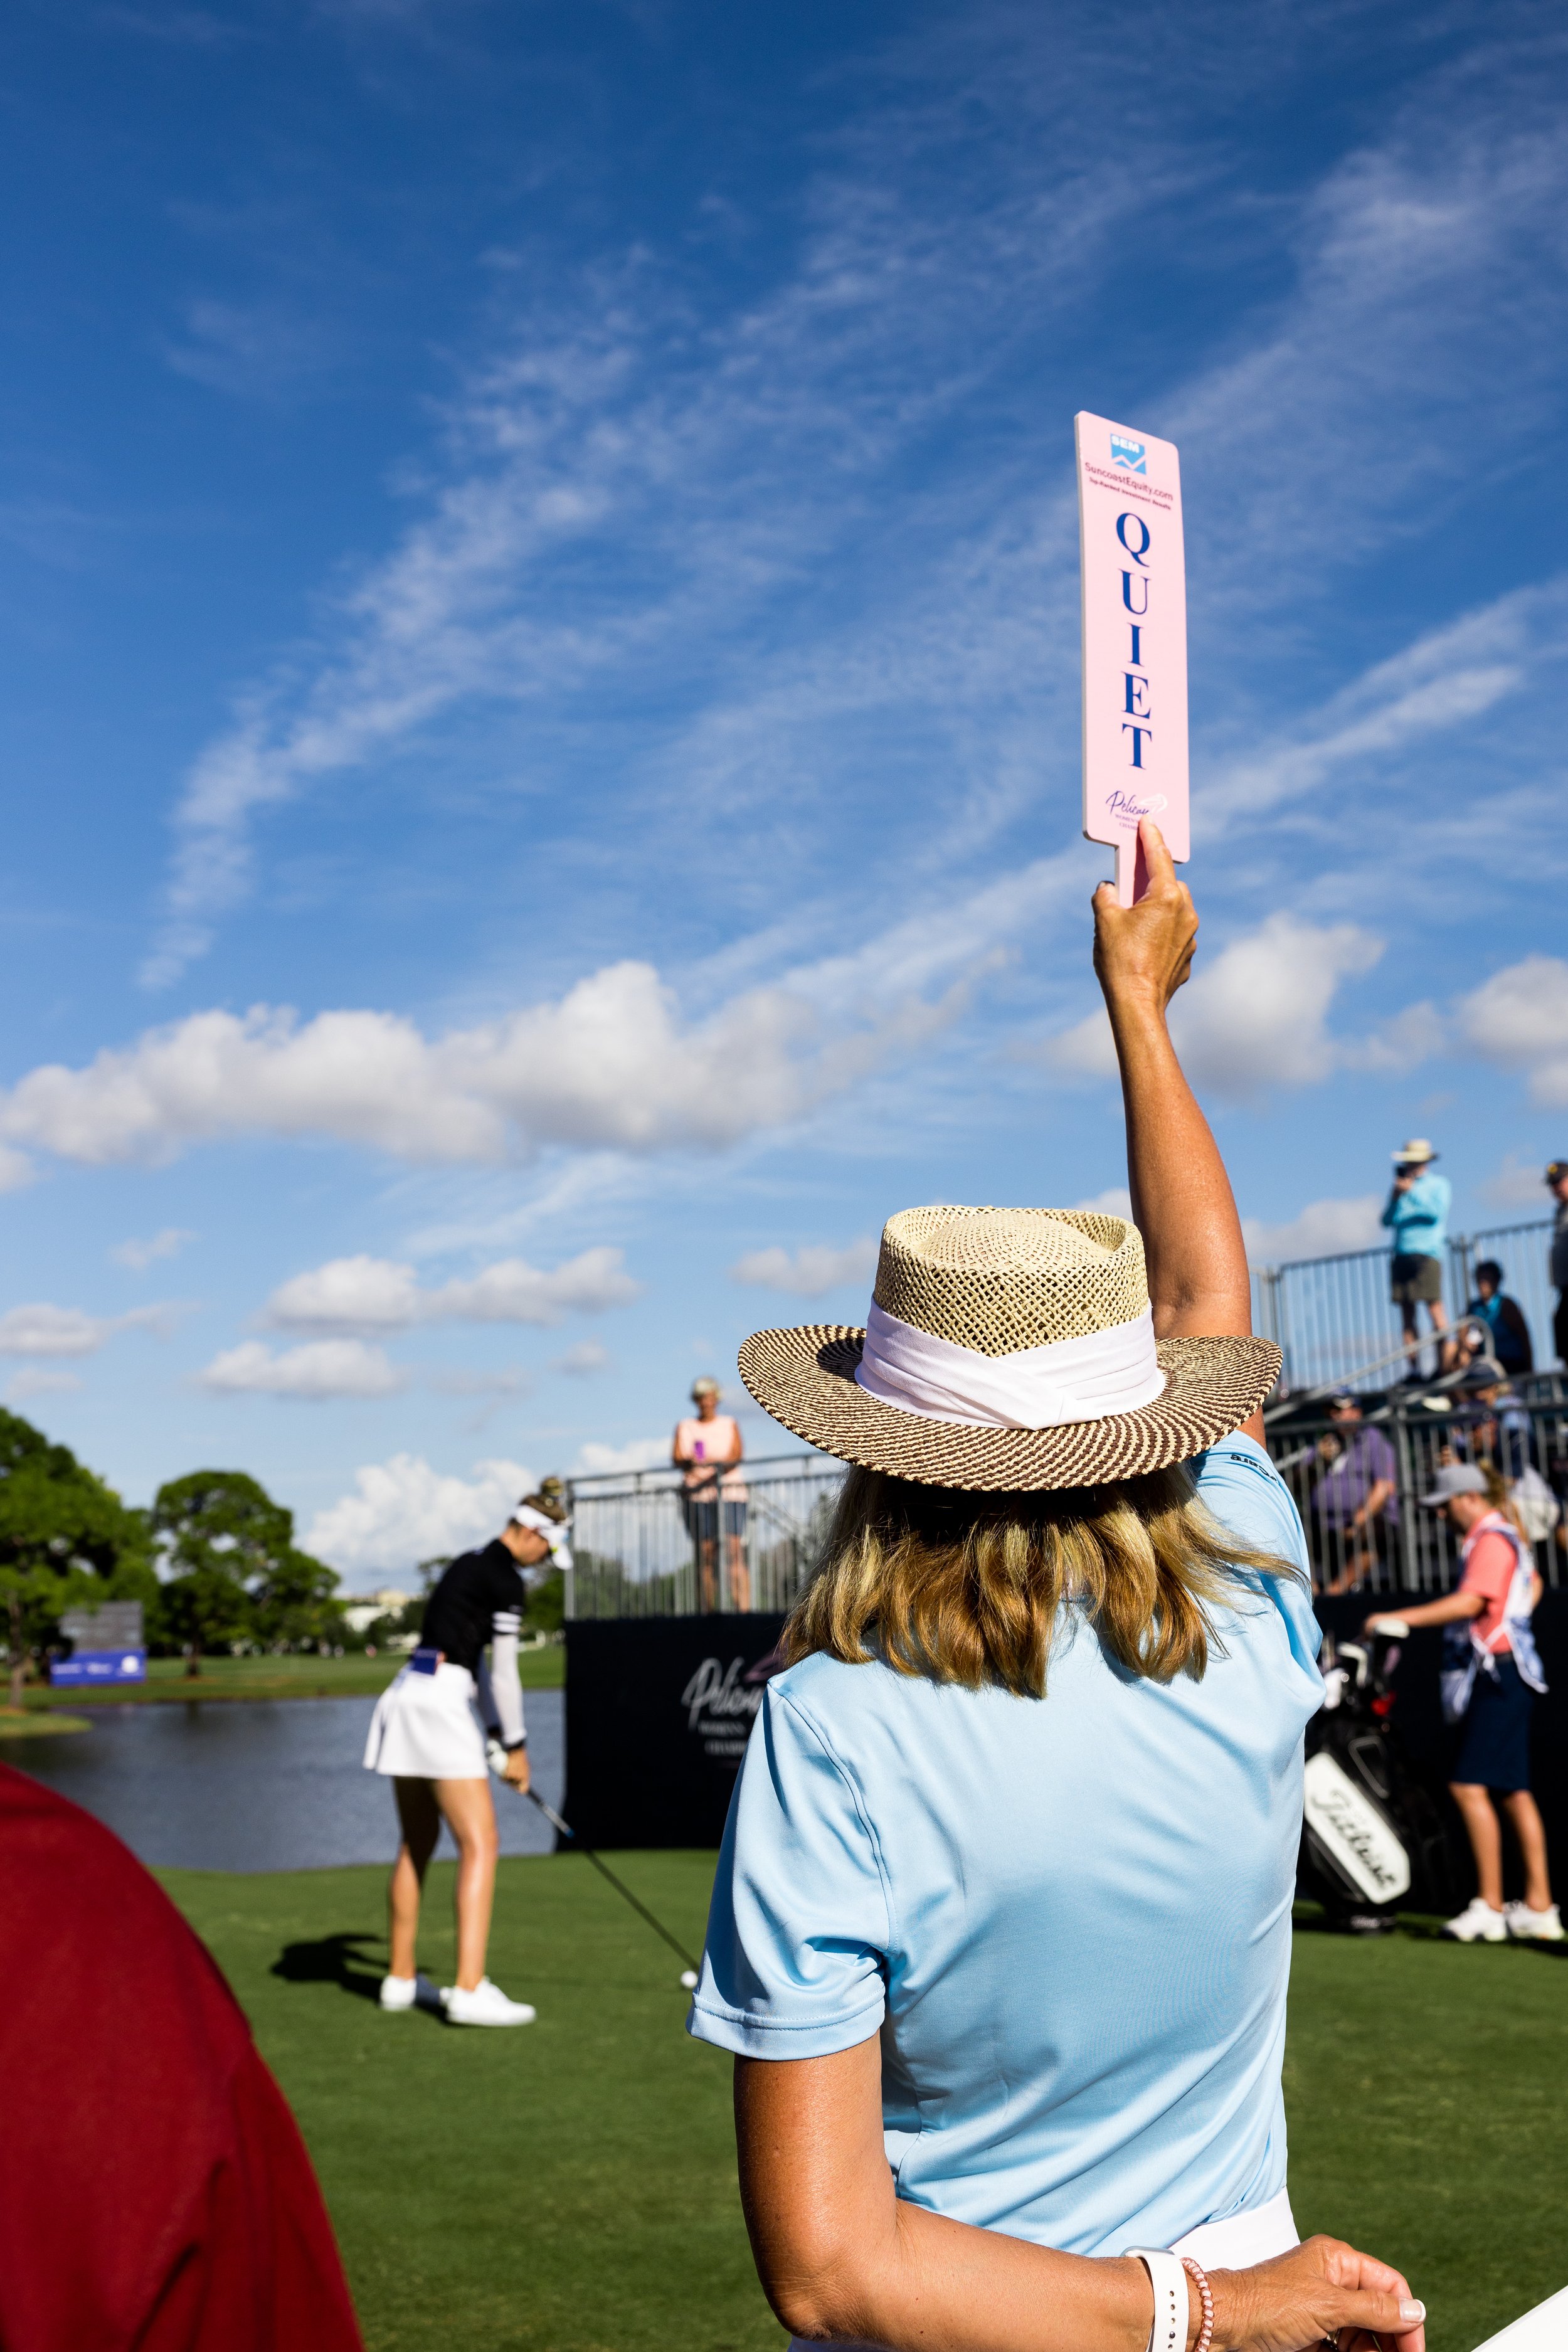  Person holding up “quiet” sign during golf tournament. 